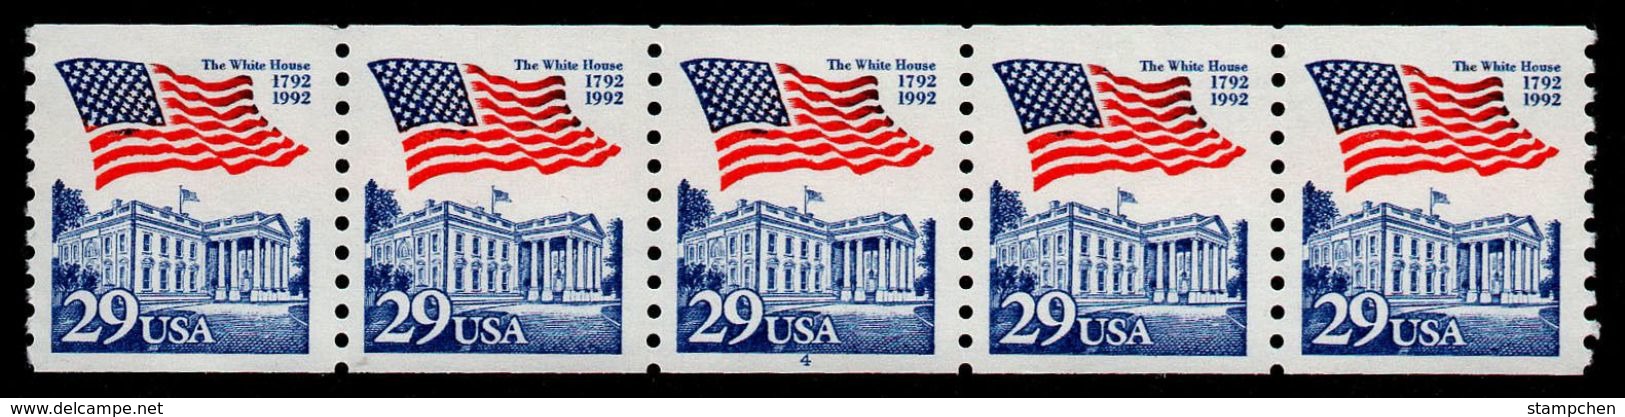 Strip Of 5-PNC # 4 -1992 USA Flag Over The White House Coil Stamp Sc#2609 Post Plate Number Coil - Coils (Plate Numbers)